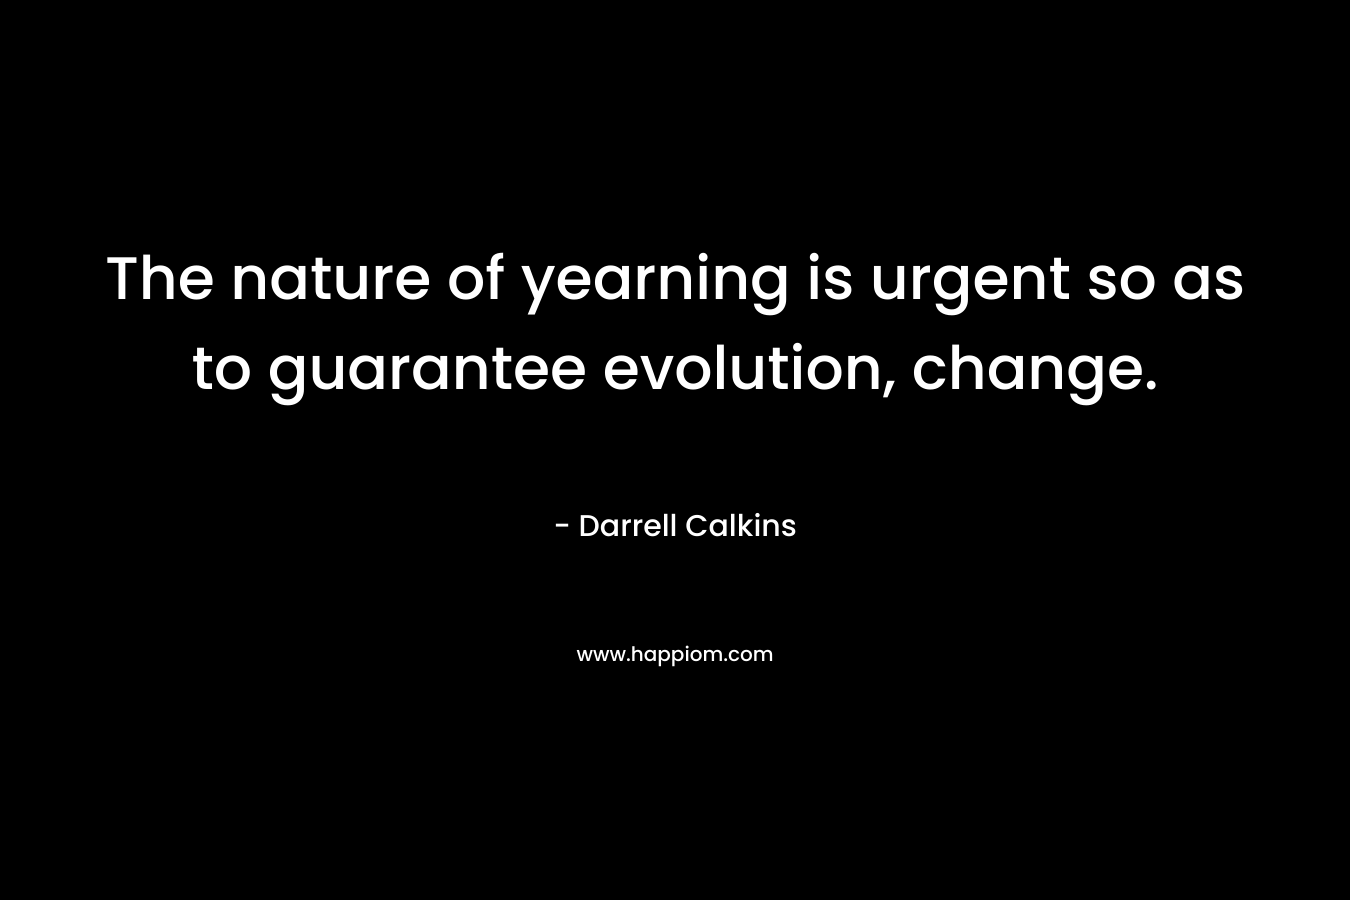 The nature of yearning is urgent so as to guarantee evolution, change.